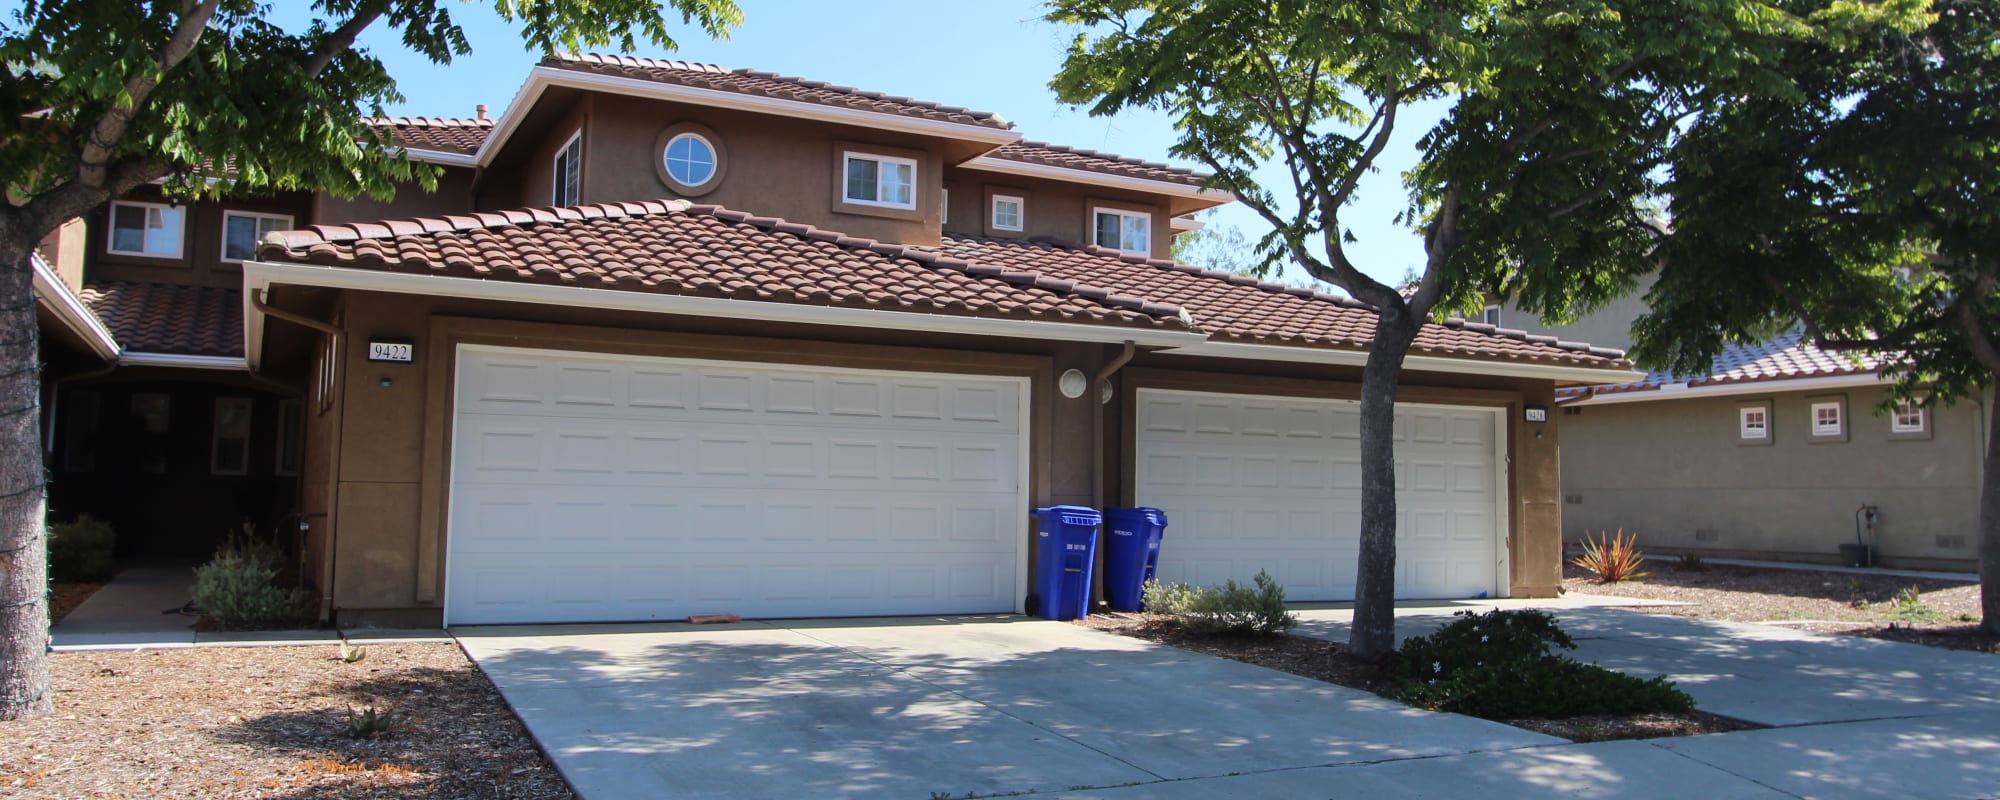 exterior of one of the homes at Mira Mesa Ridge in San Diego, California